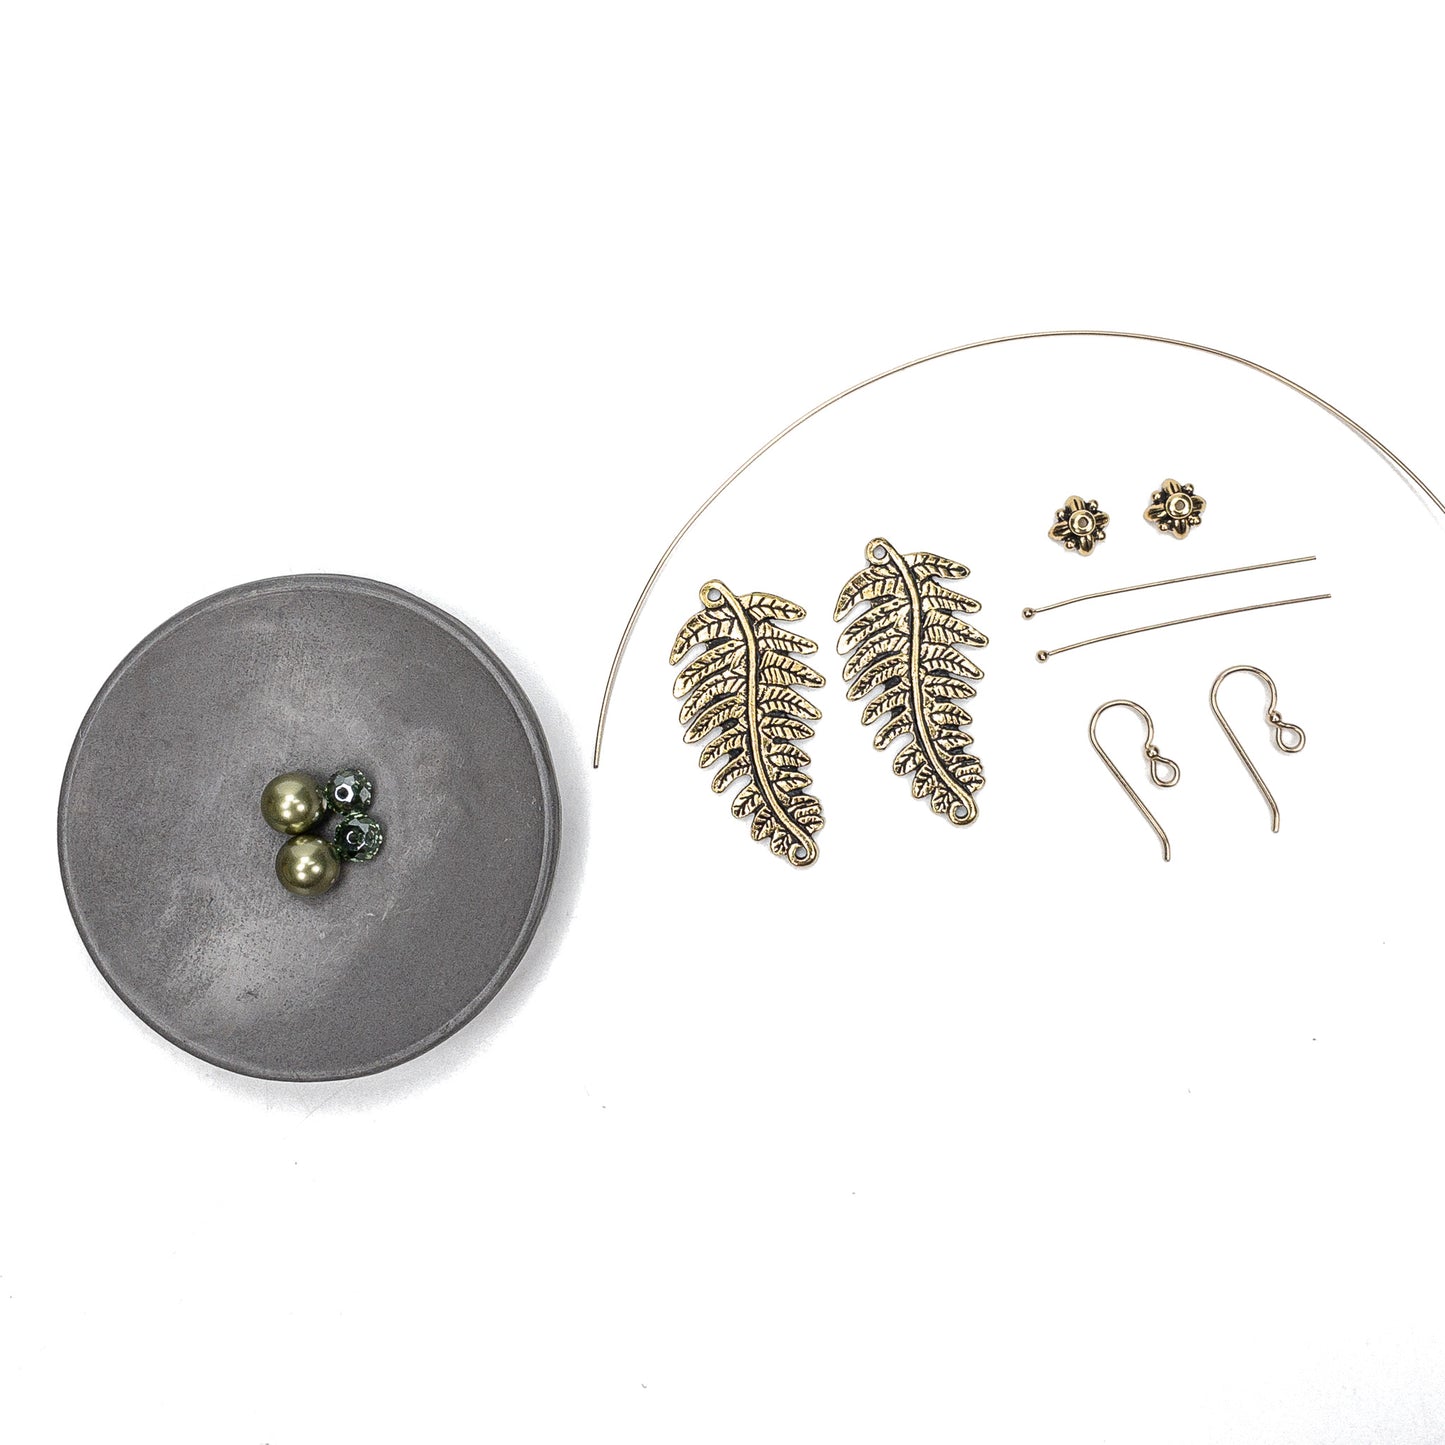 Fern Leaf Earring (3 Colors Available) - Kit or Finished Earrings